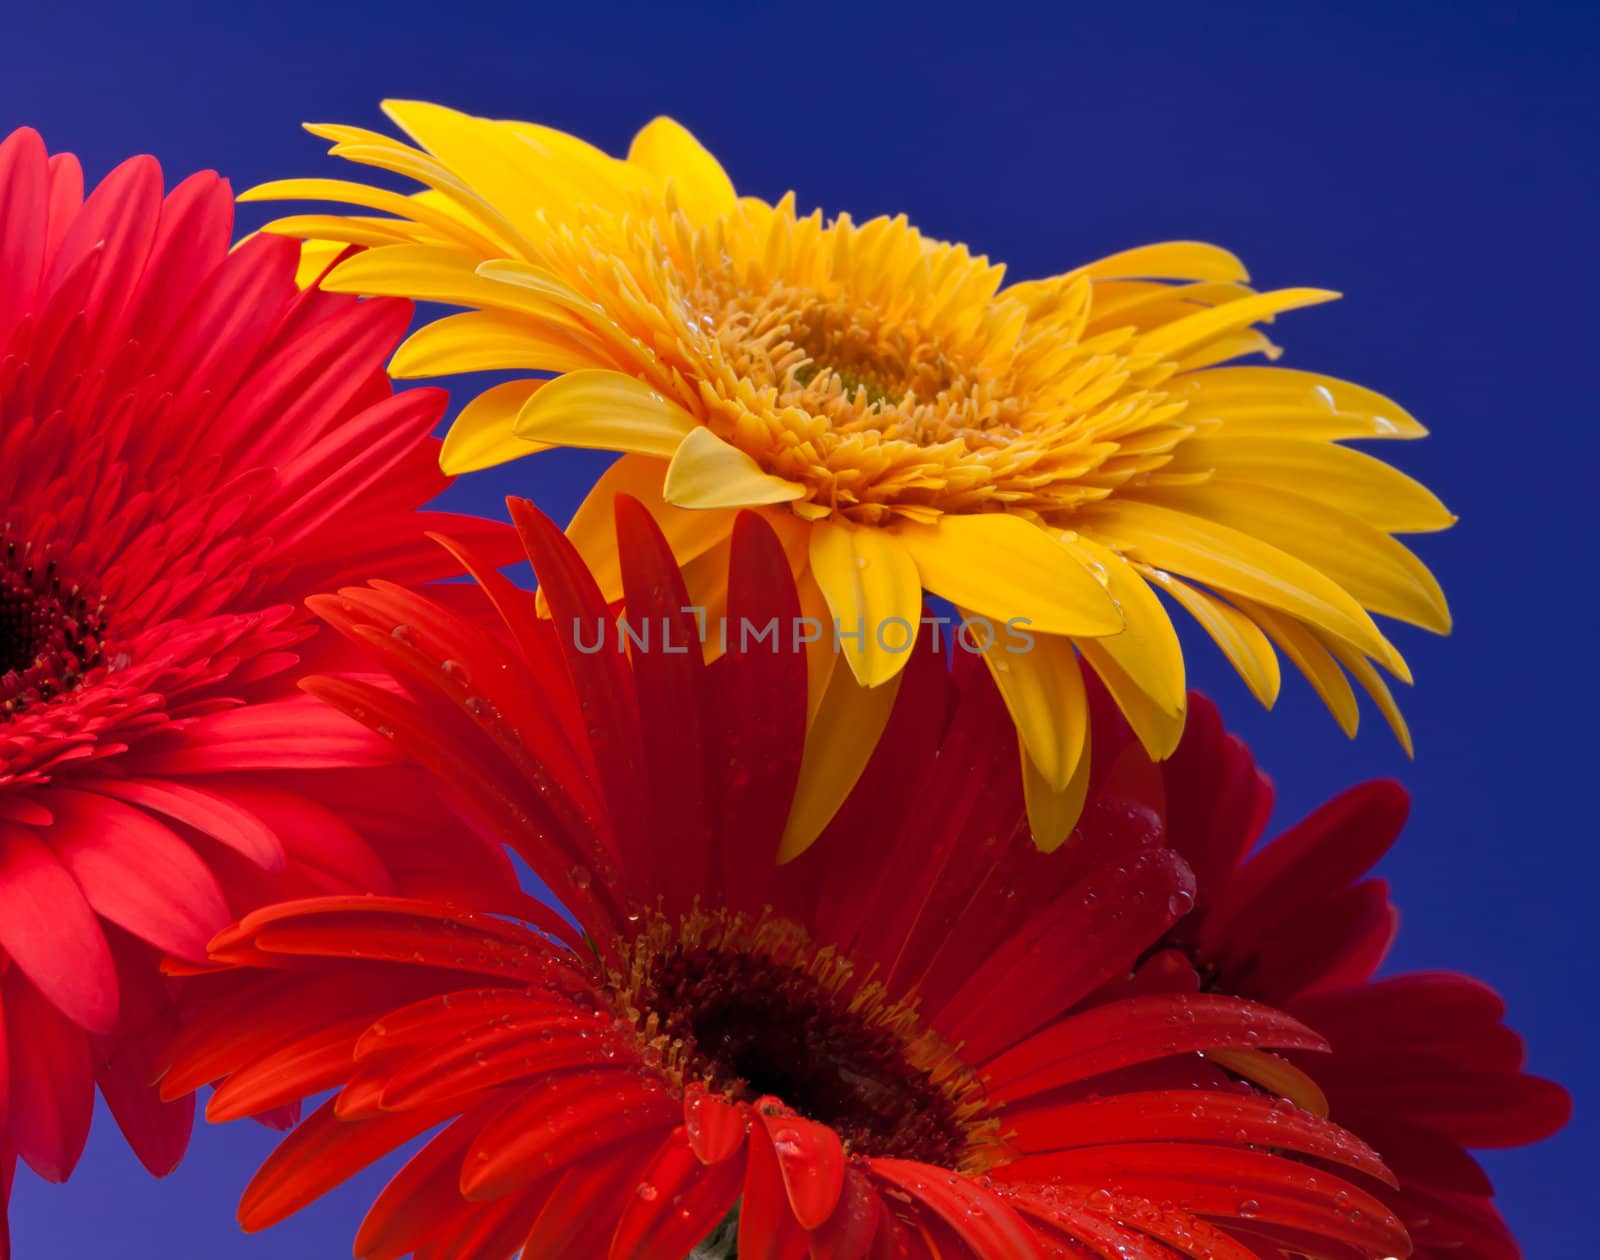 Gerbera is a genus of ornamental plants from the sunflower family (Asteraceae).